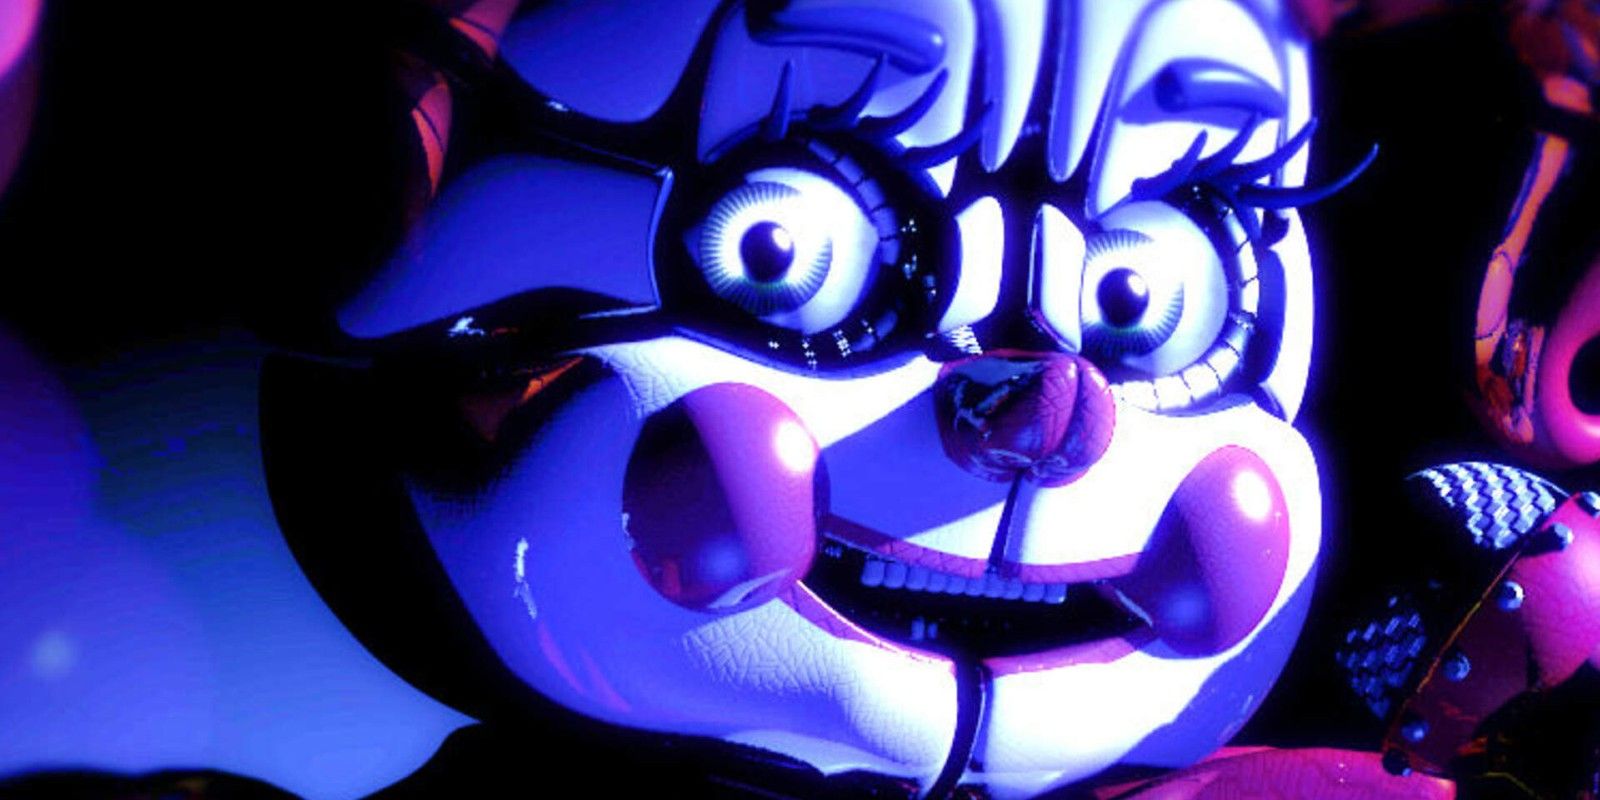 Real-Life FNAF Circus Baby Animatronic Shows How Terrifying She Really Is